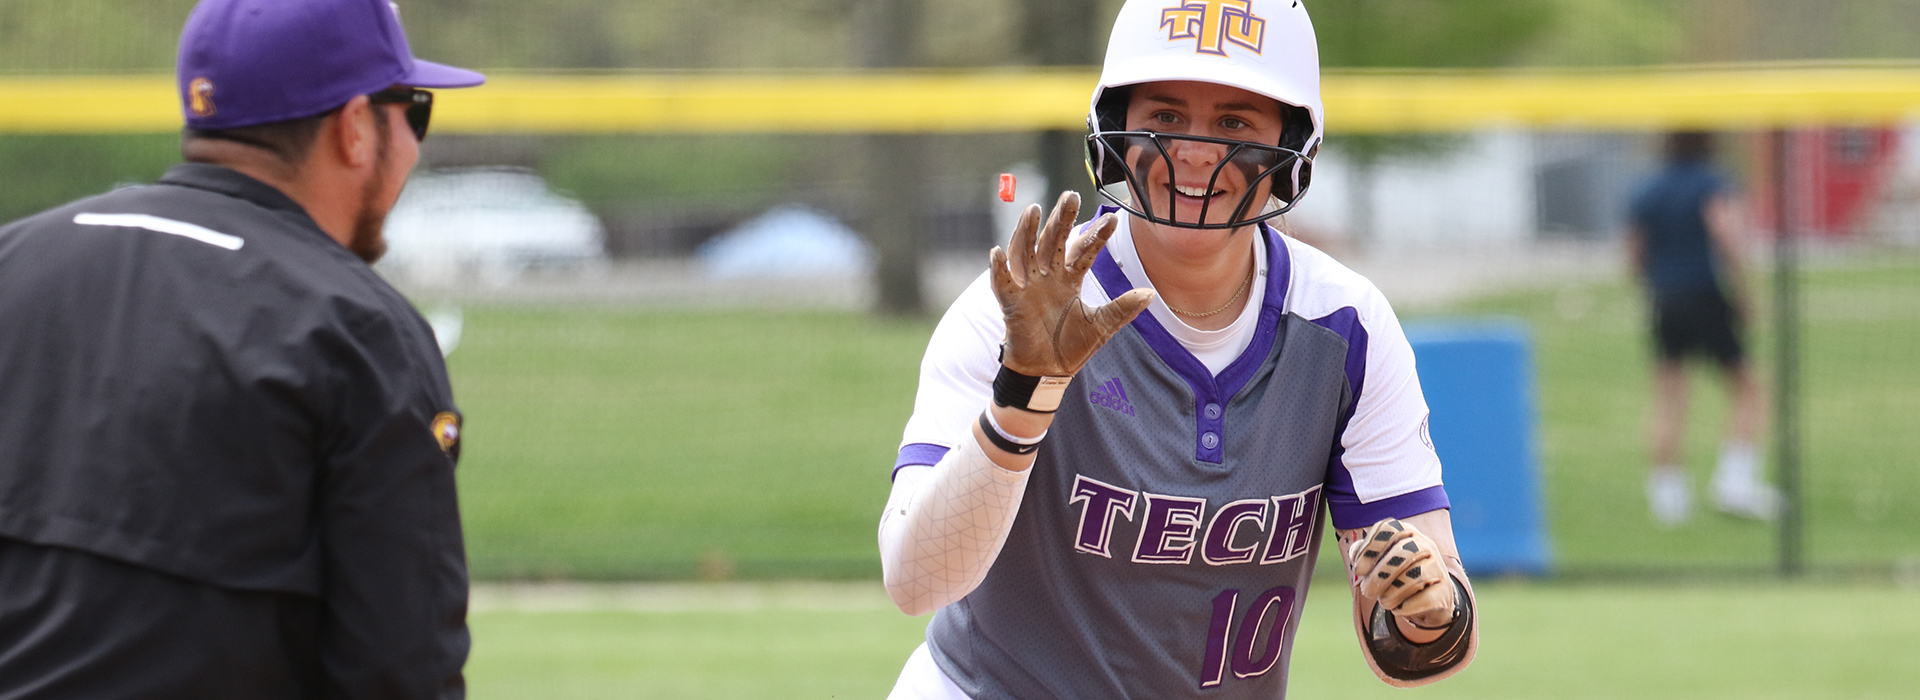 Golden Eagles fall in finale twinbill at Eastern Illinois